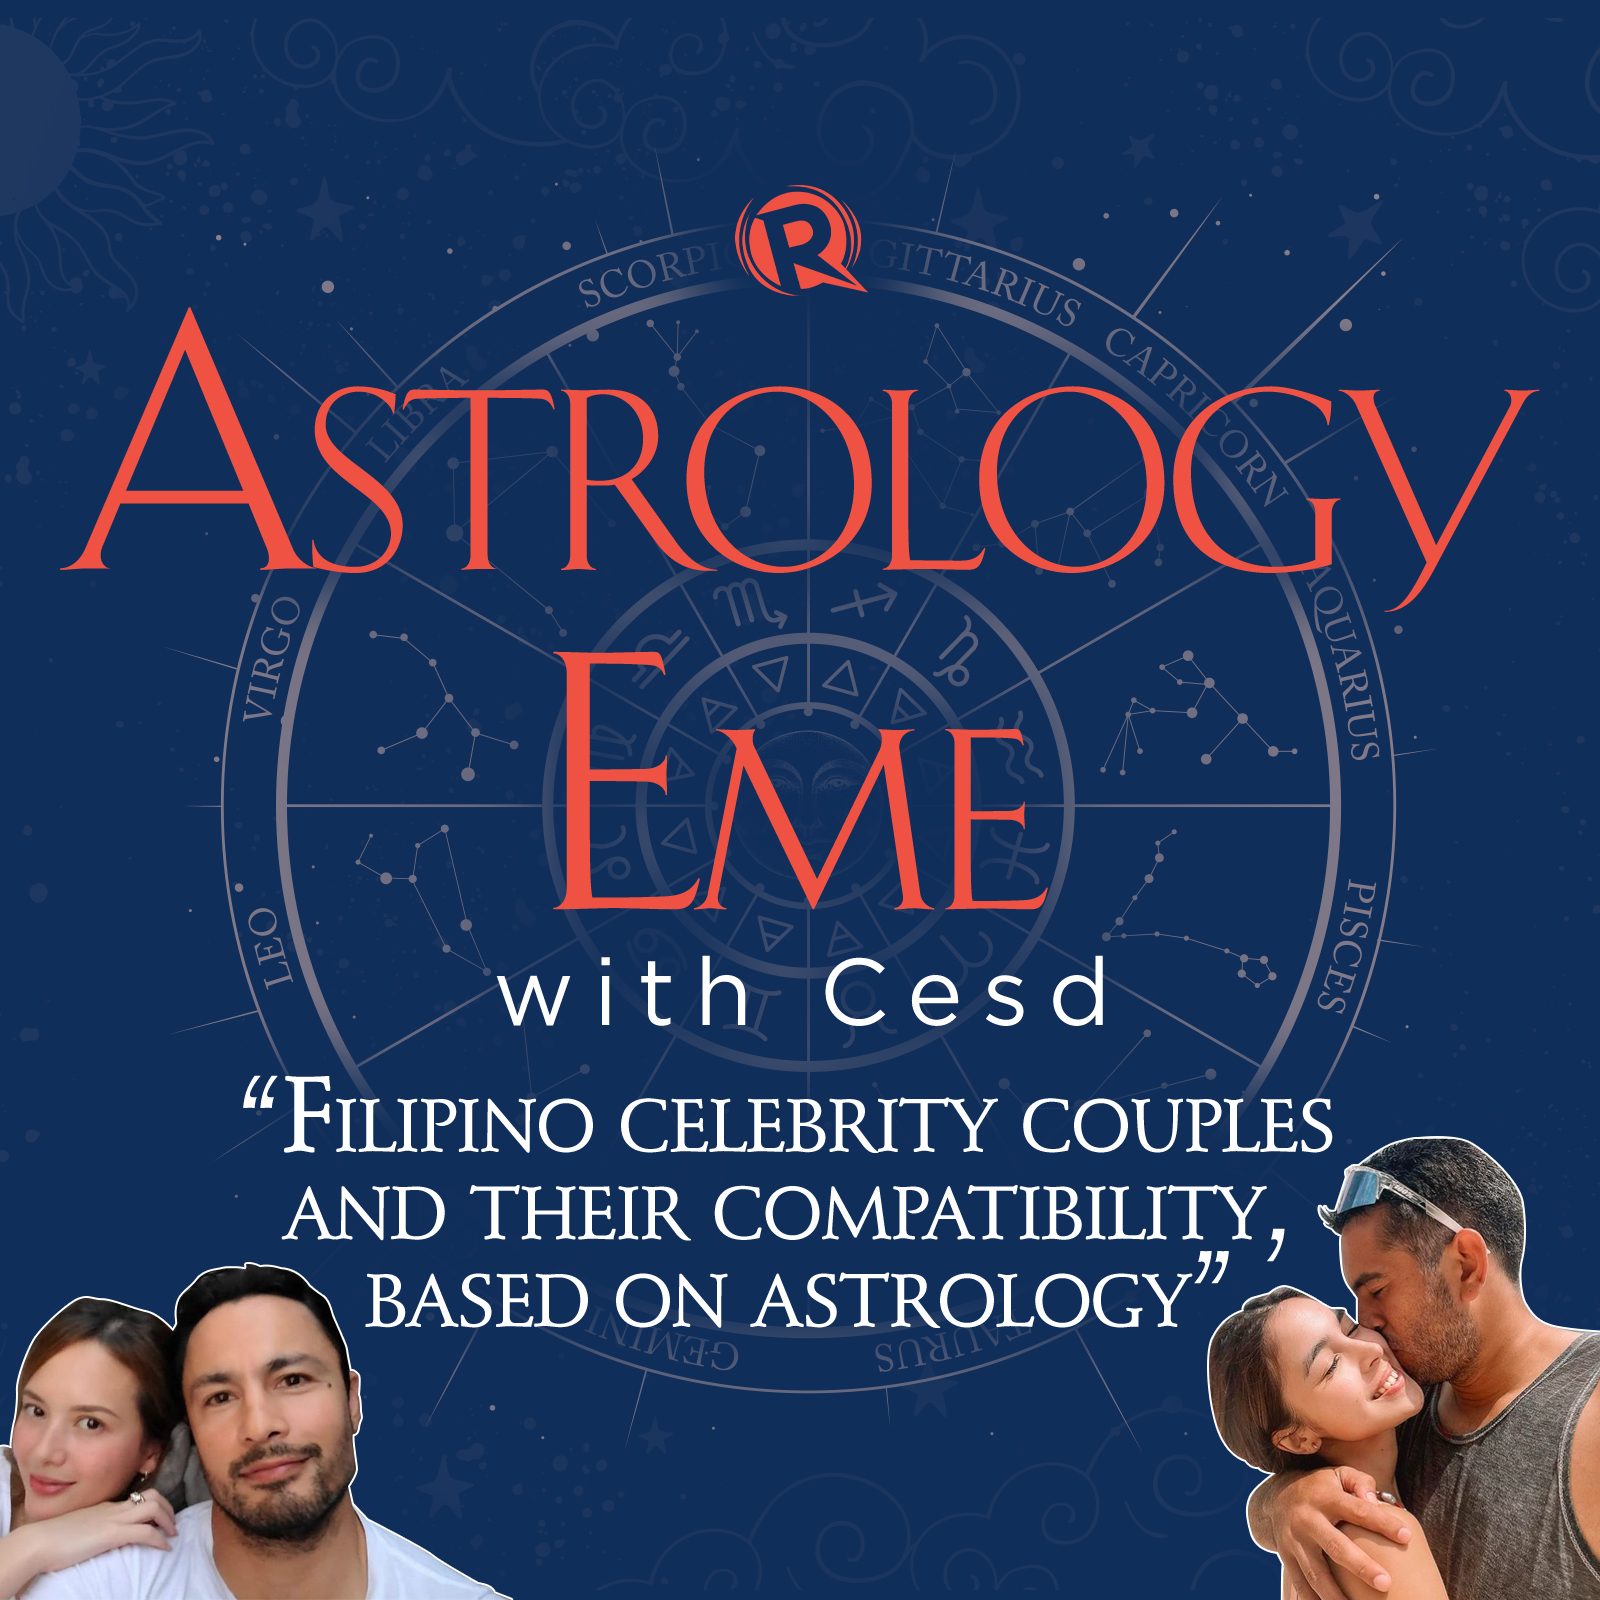 [PODCAST] Astrology Eme with Cesd: Filipino celebrity couples and their compatibility, based on astrology